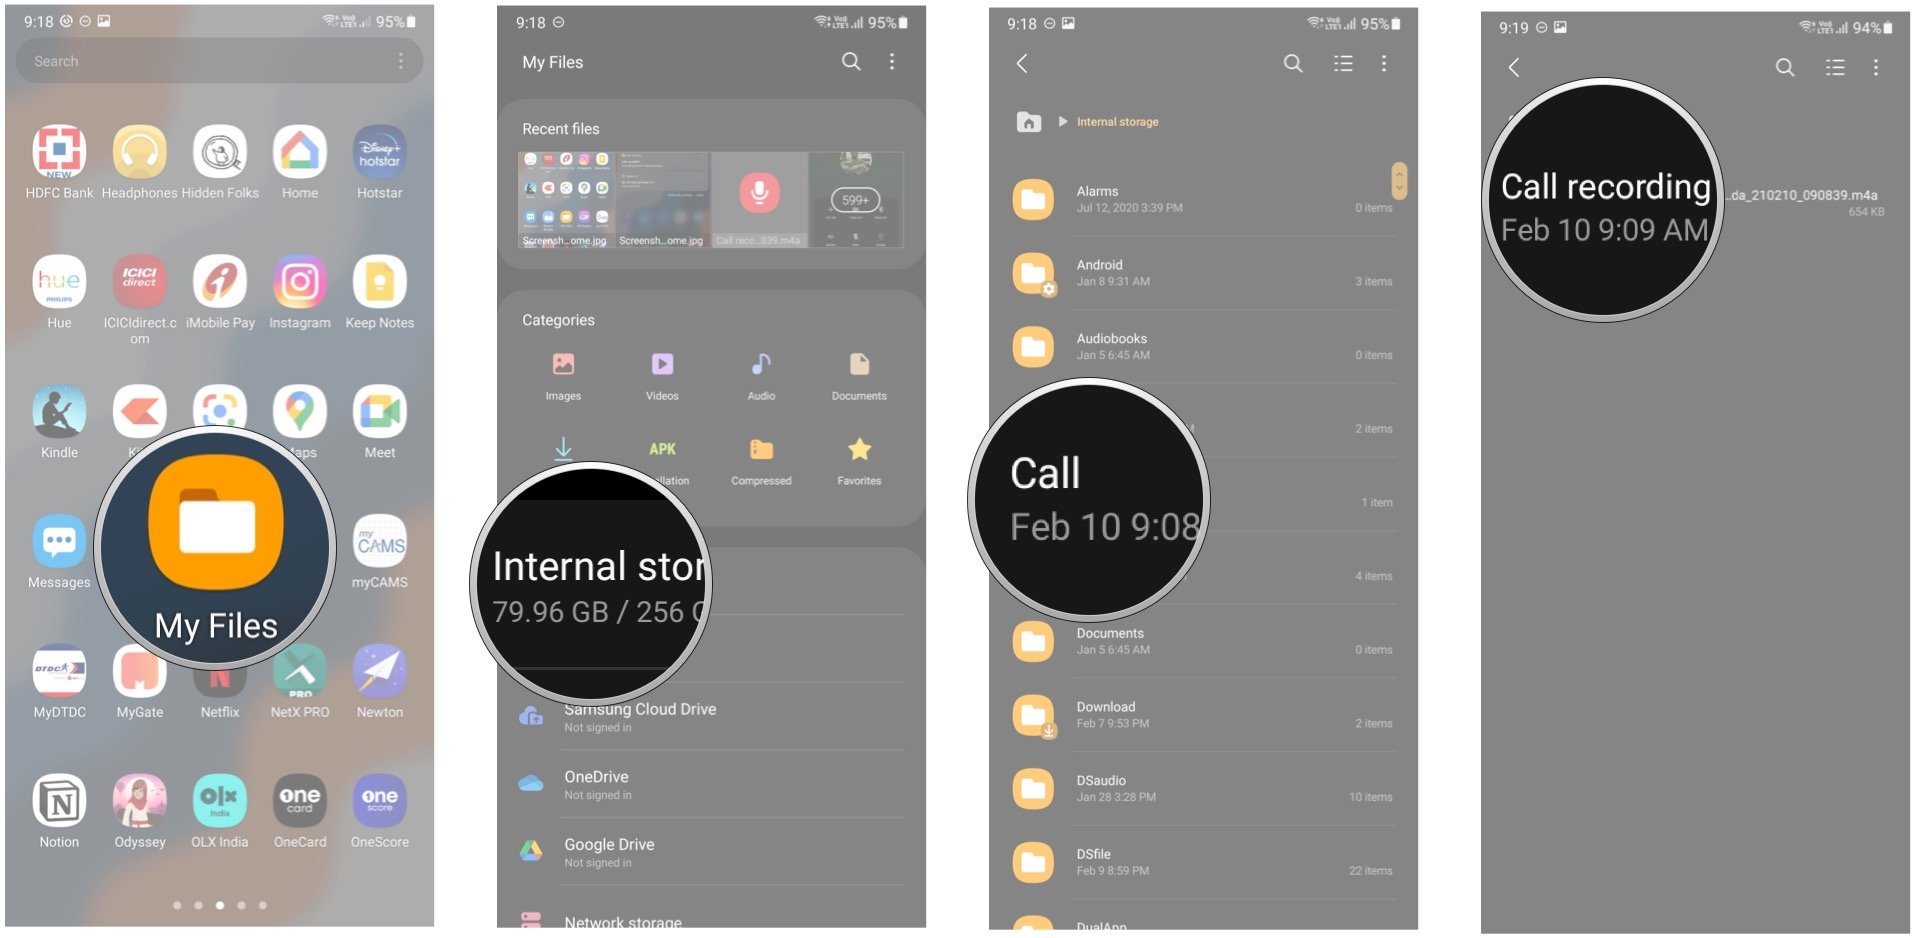 How to record phone calls on your Samsung Galaxy phone